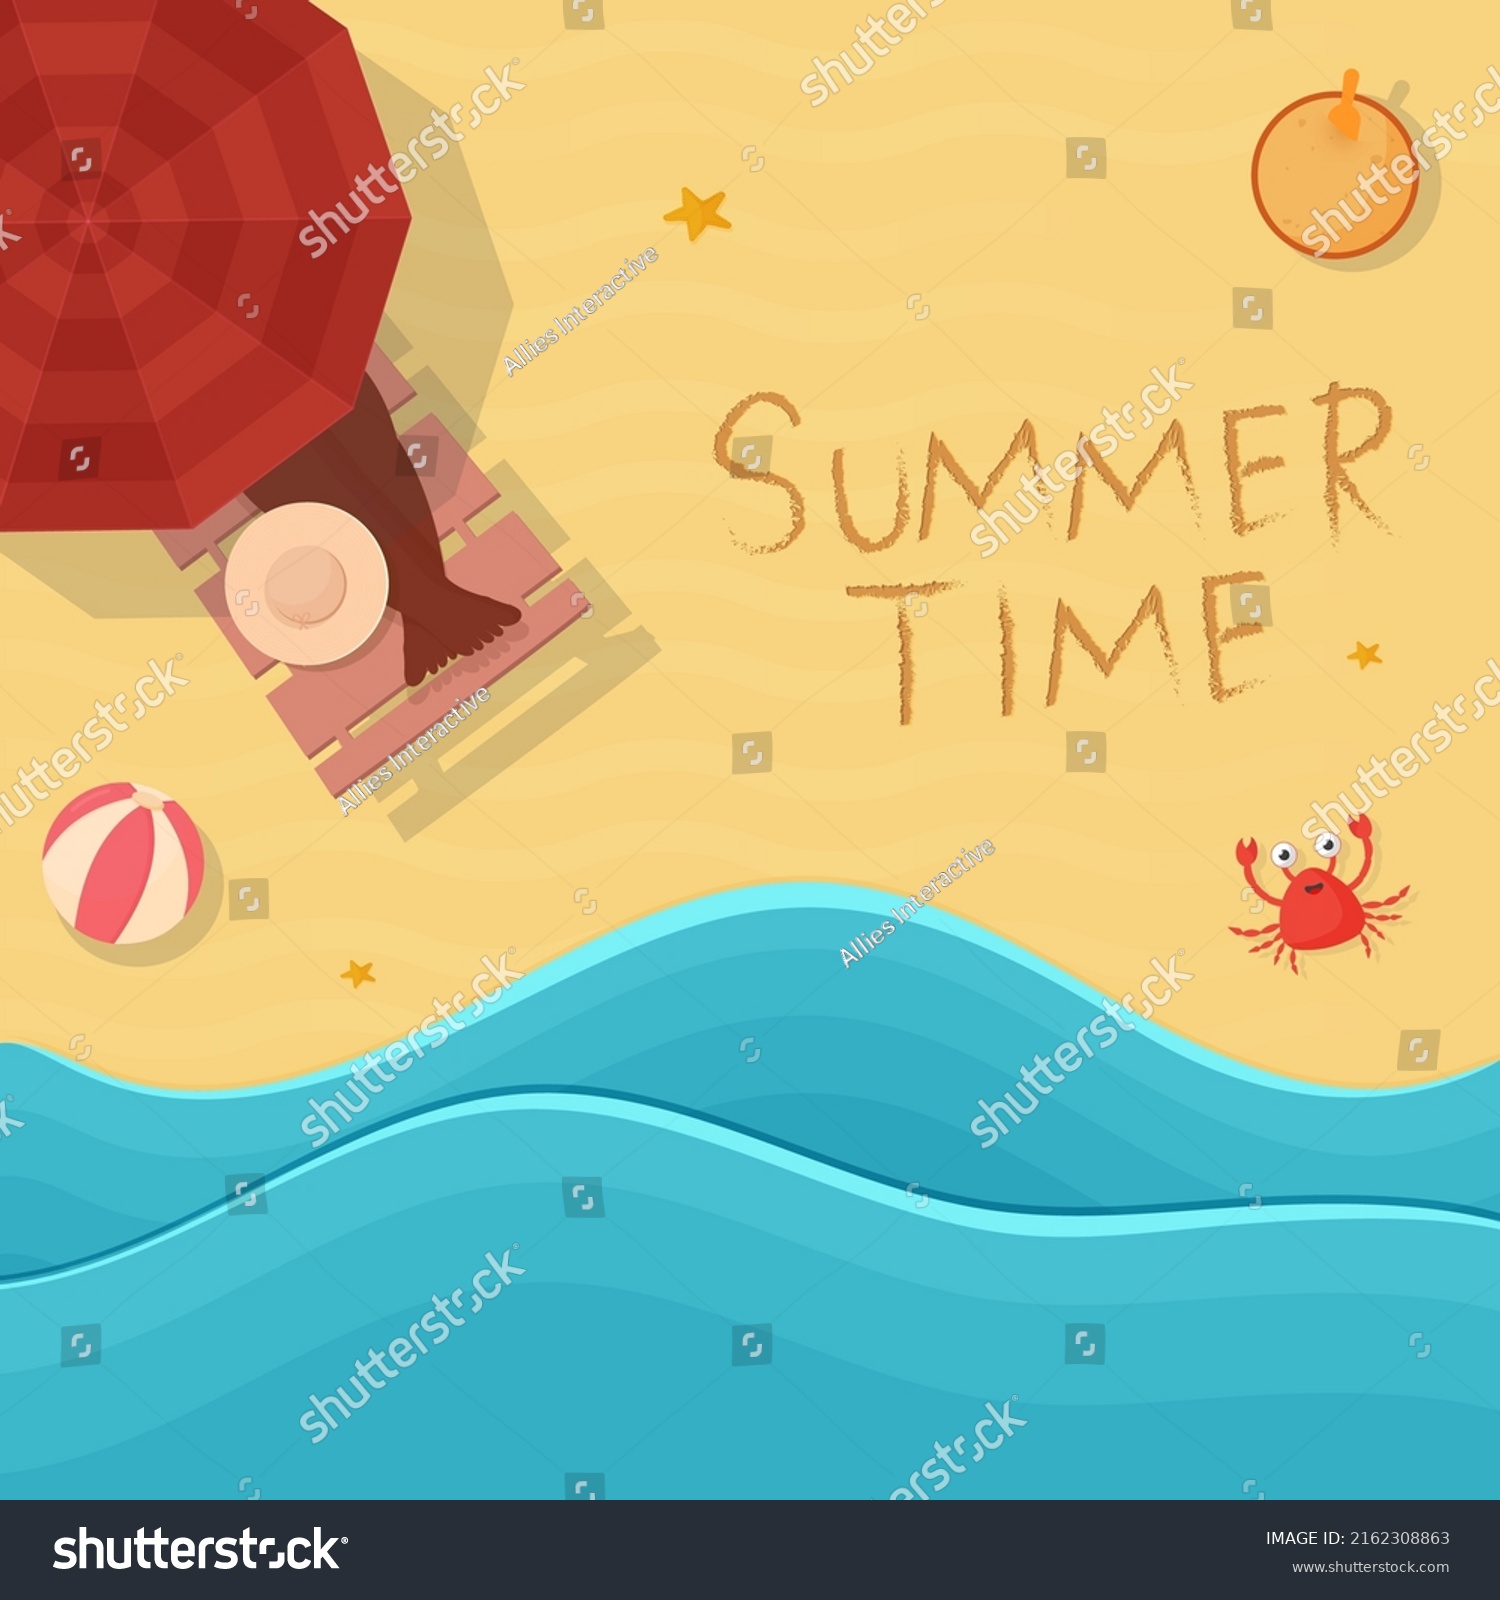 SVG of Summertime Poster Design With Top View Of Sun Lounger, Sand Bucket, Crab On Beach Side Background. svg